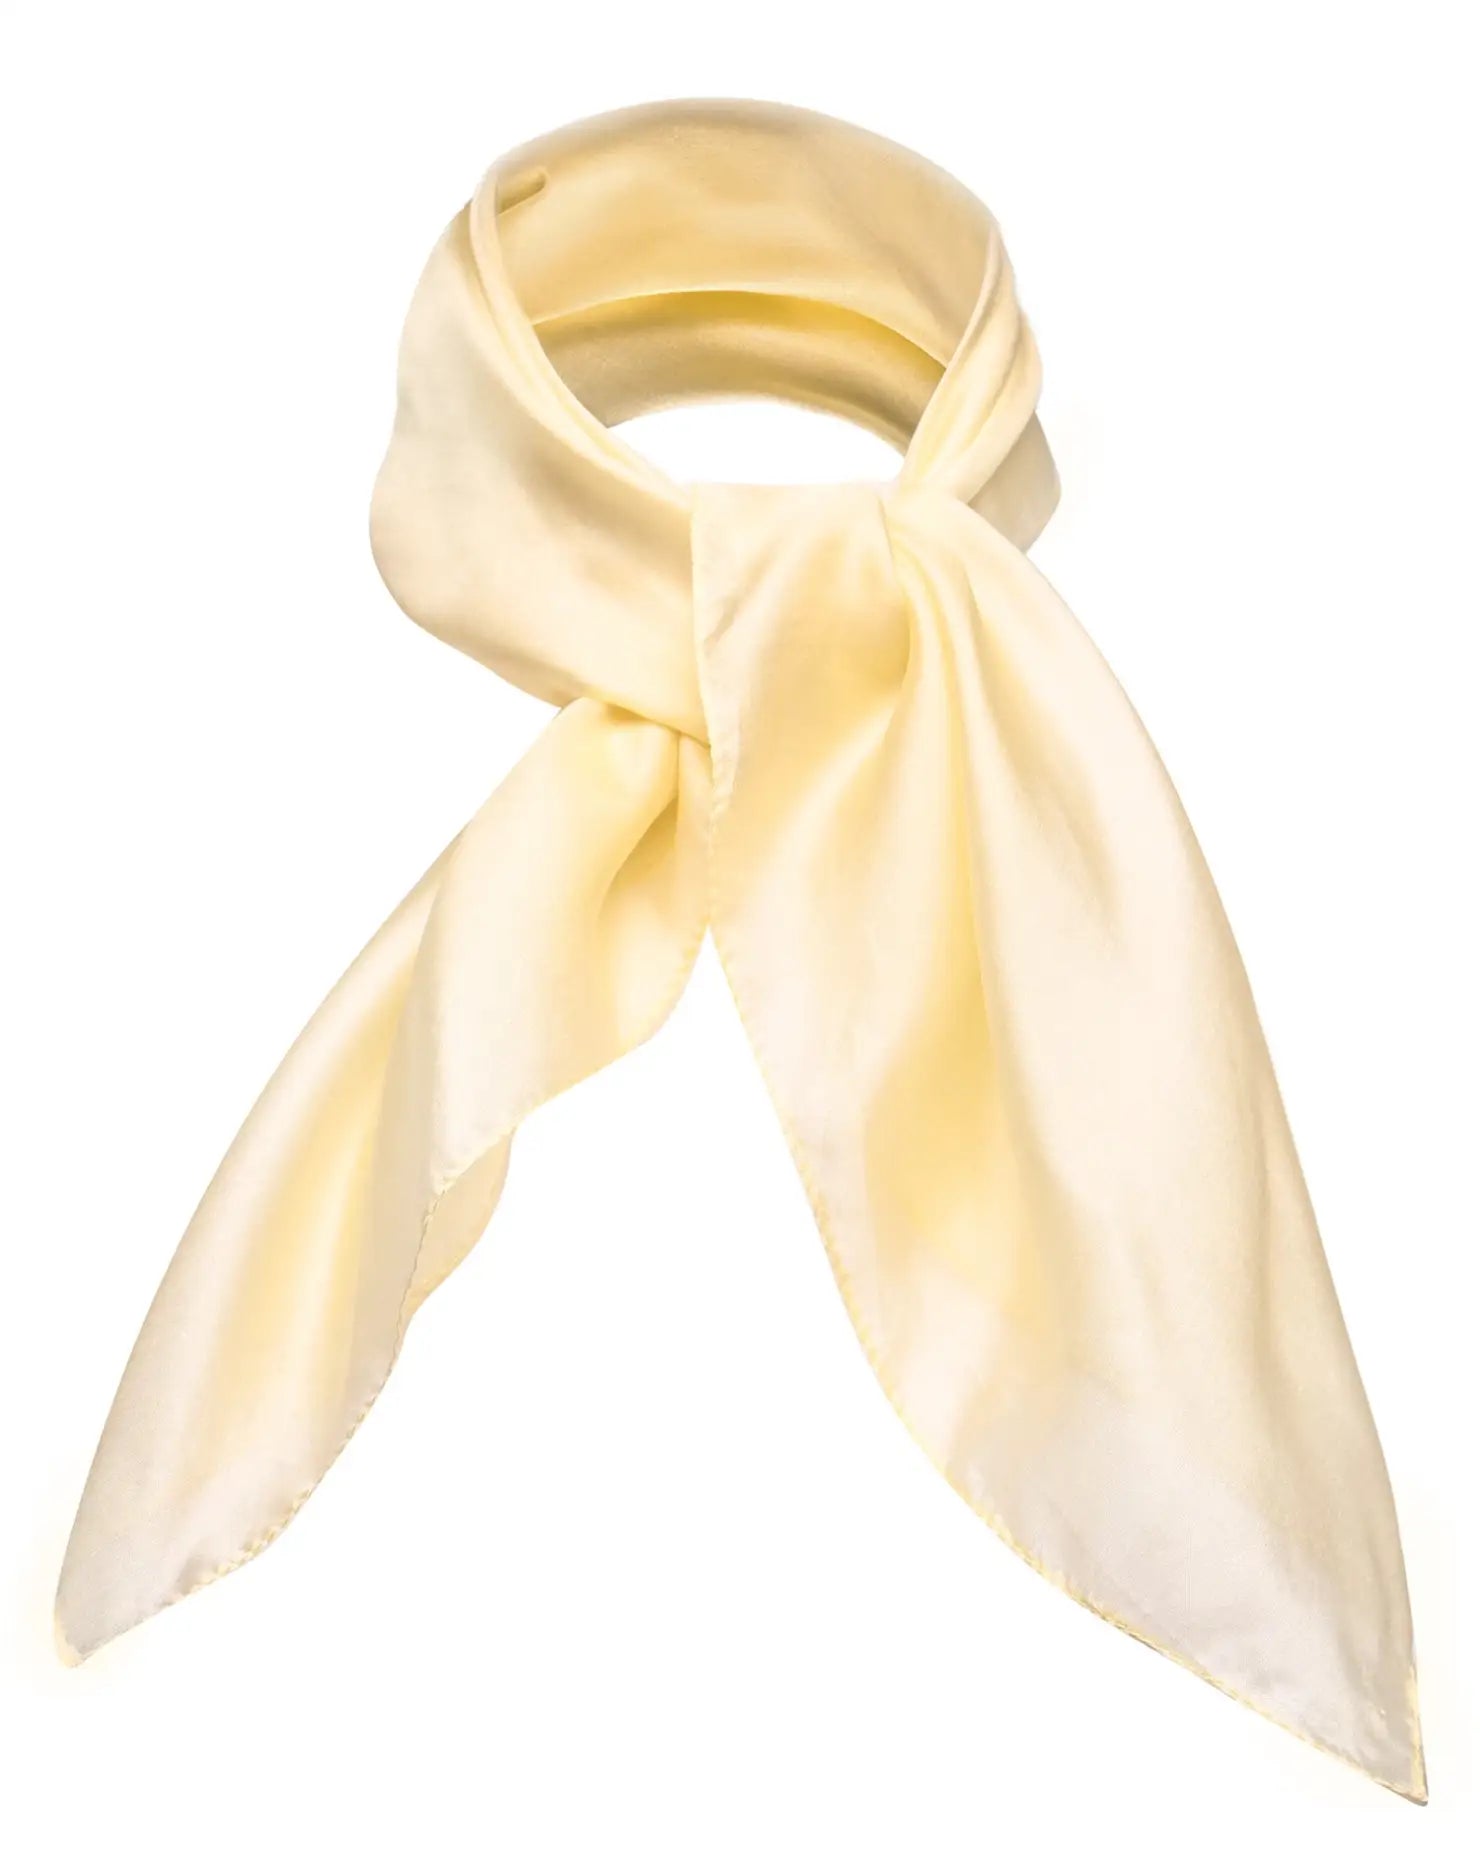 Luxurious 100% Mulberry Silk Small Square Scarf, white scarf on white background